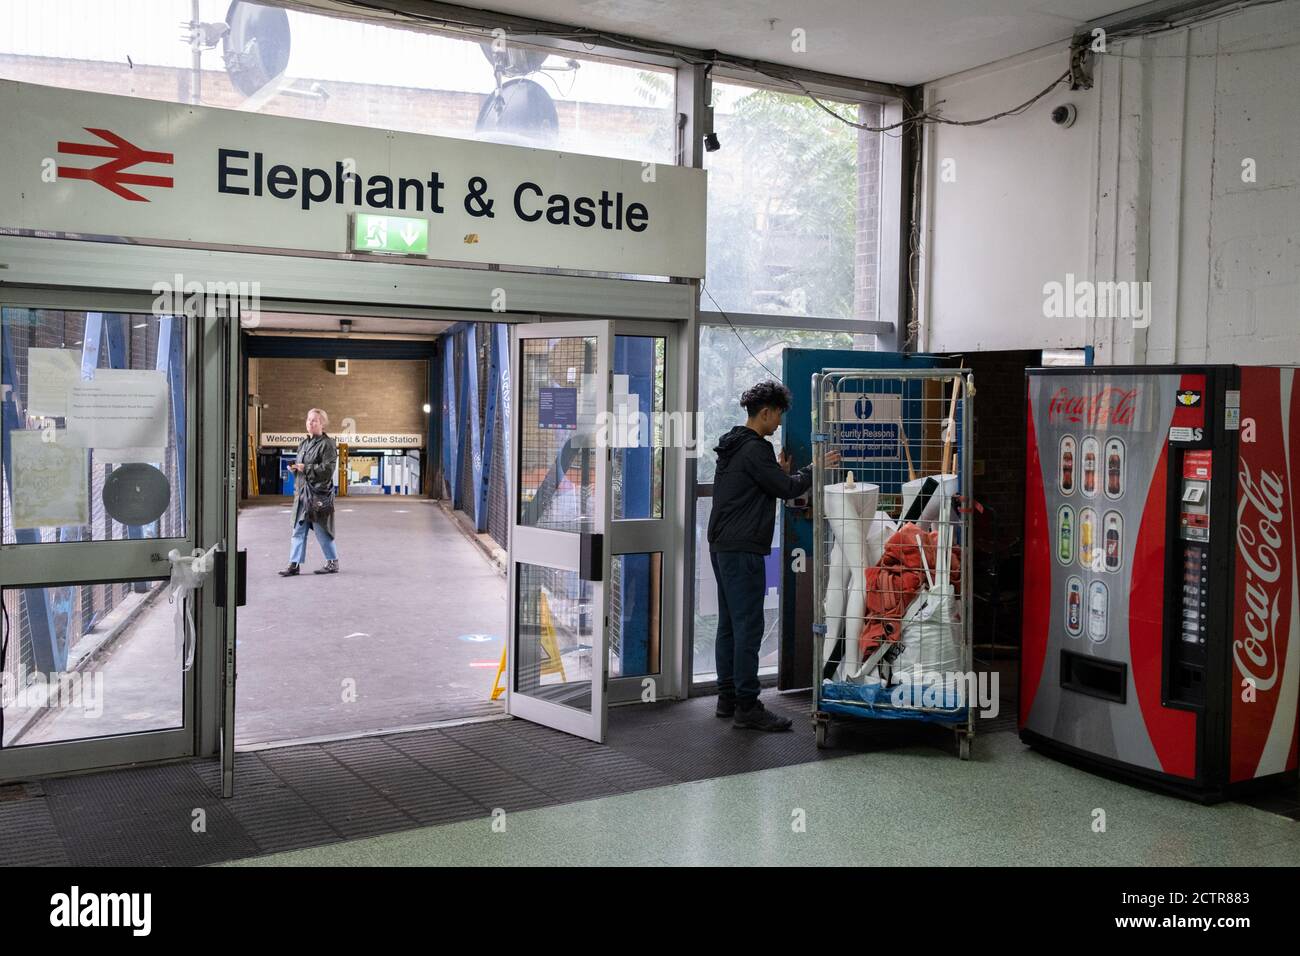 On the day that Elephant & Castle Shopping Centre closes before its demolition and redevelopment, 1960s architecture and retail stock is taken away by shop keepers before doors are locked for the final time after 55 years, on 24th September 2020, in south London, England. The much-criticised architecture of the Elephant & Castle Shopping Centre was opened in 1965, built on the bomb damaged site of the former Elephant & Castle Estate, originally constructed in 1898. The centre was home to restaurants, clothing retailers, fast food businesses and clubs where south Londoners socialised and met li Stock Photo